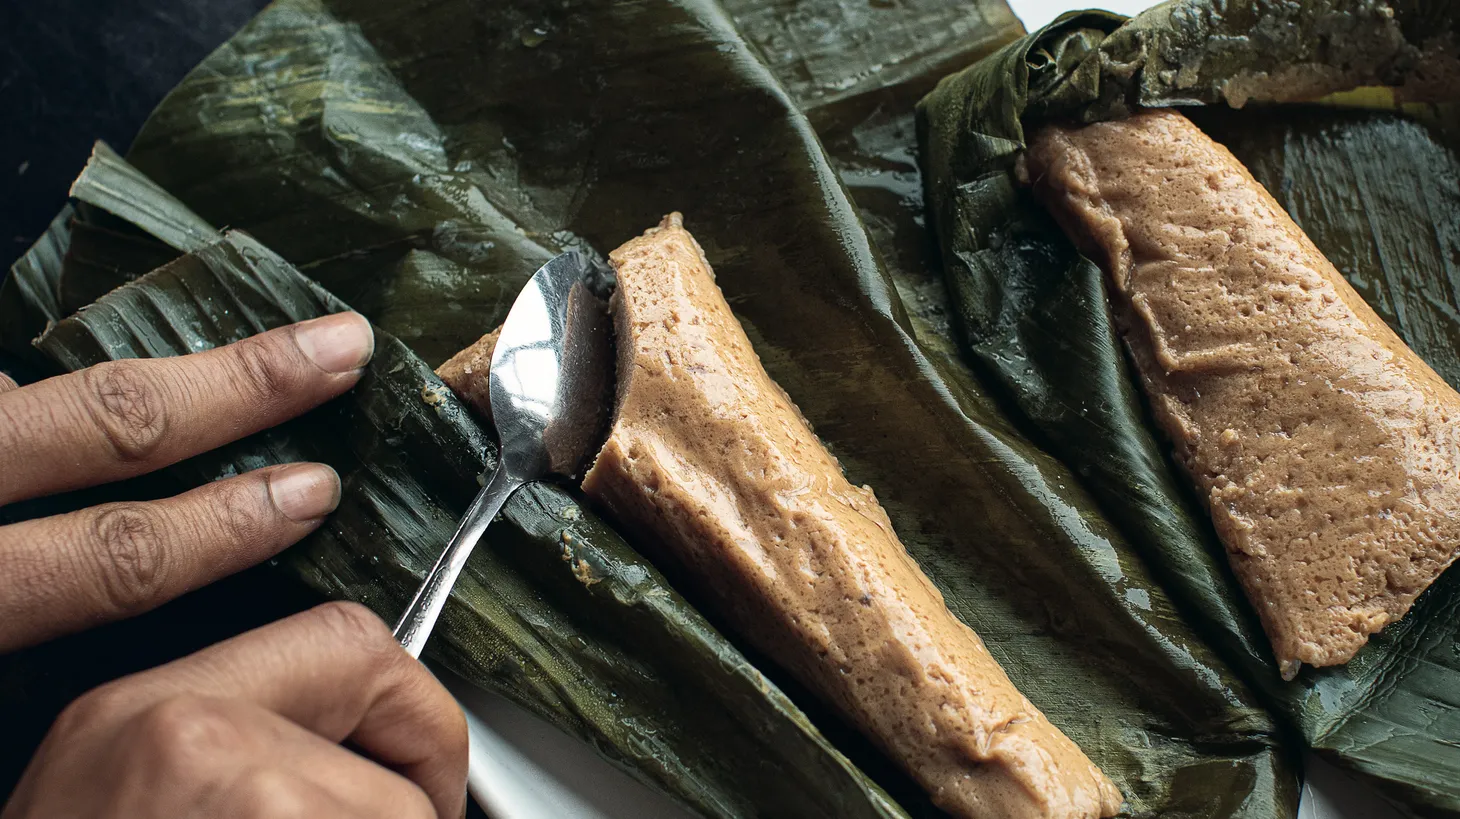 In Nigeria, moi moi is made by puréeing black-eyed peas into a tender pudding and wrapped in banana leaves.